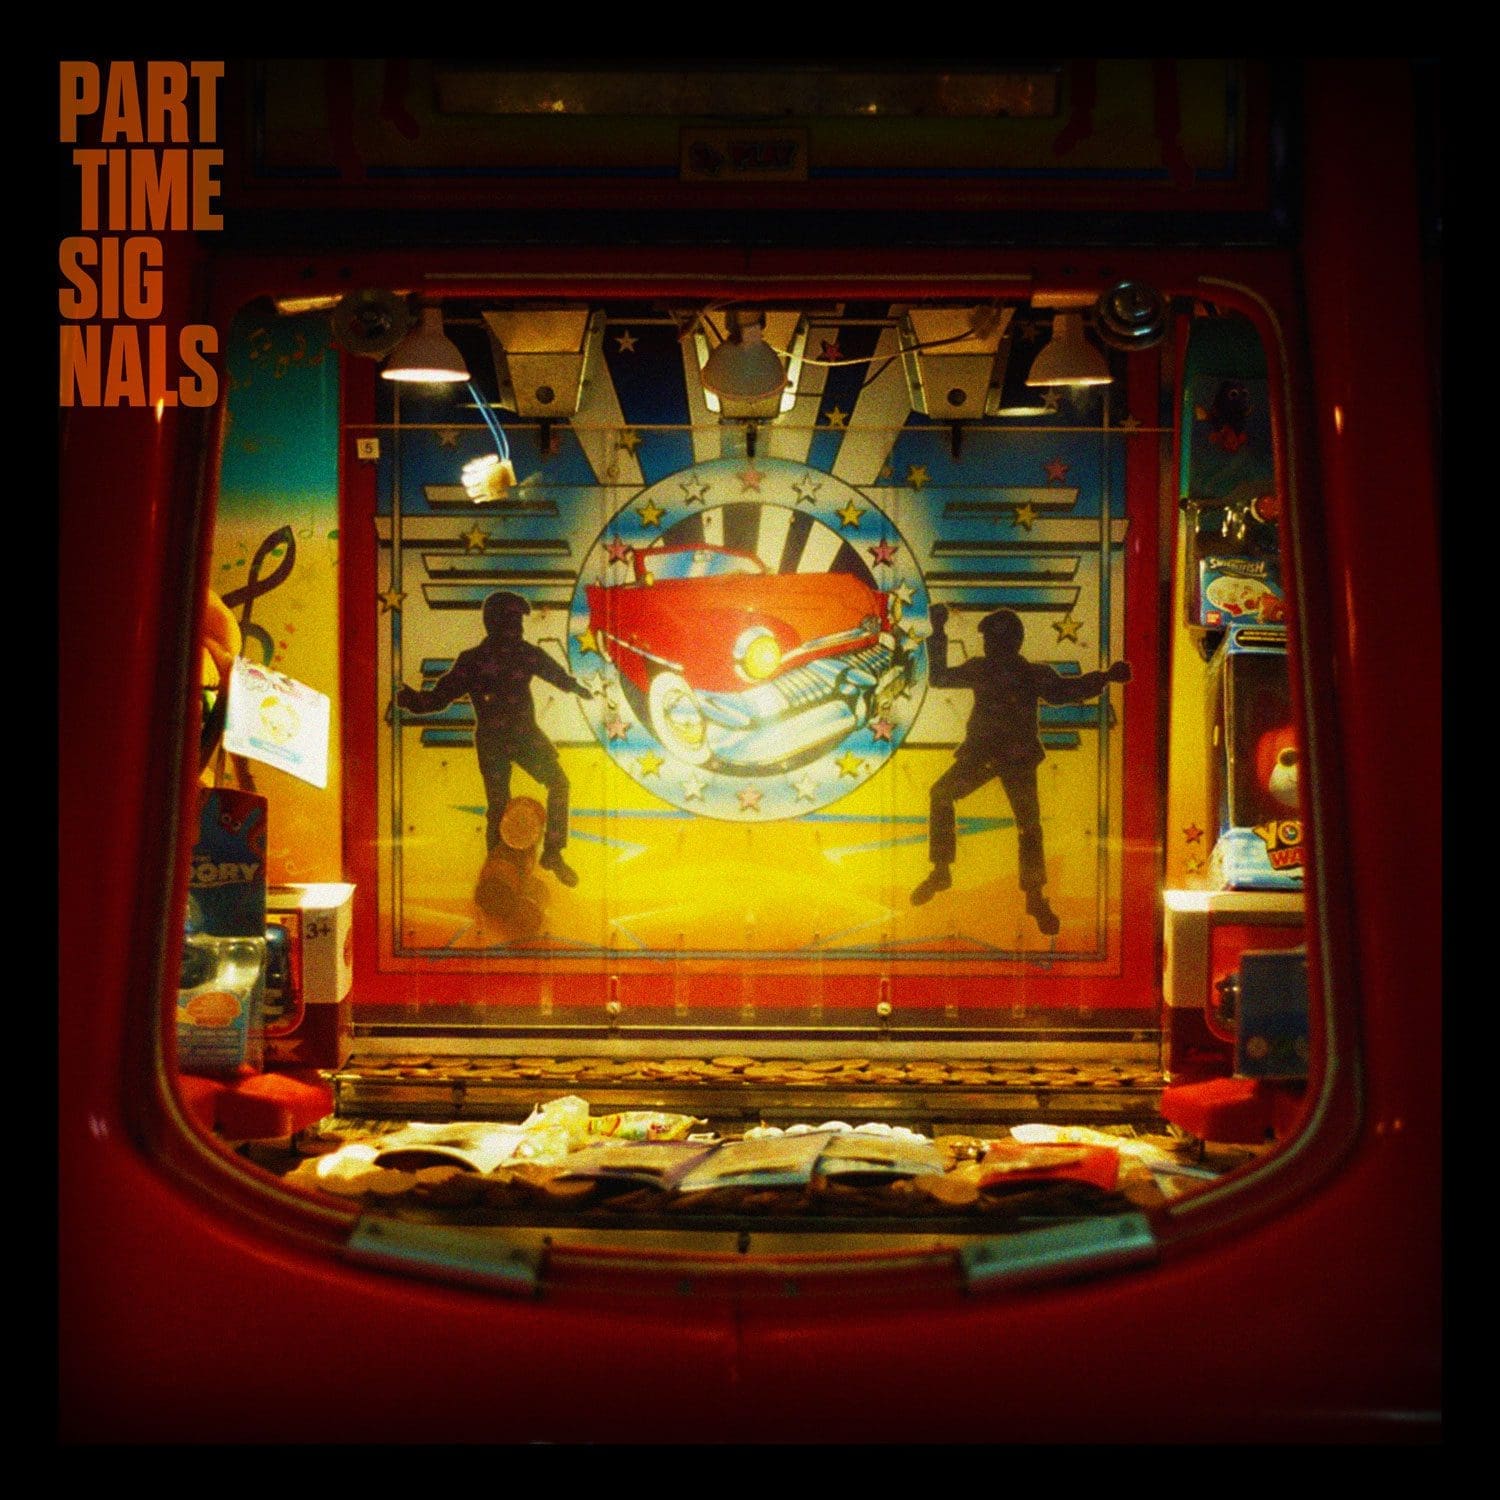 Part Time Signals - Another Day in Paradise